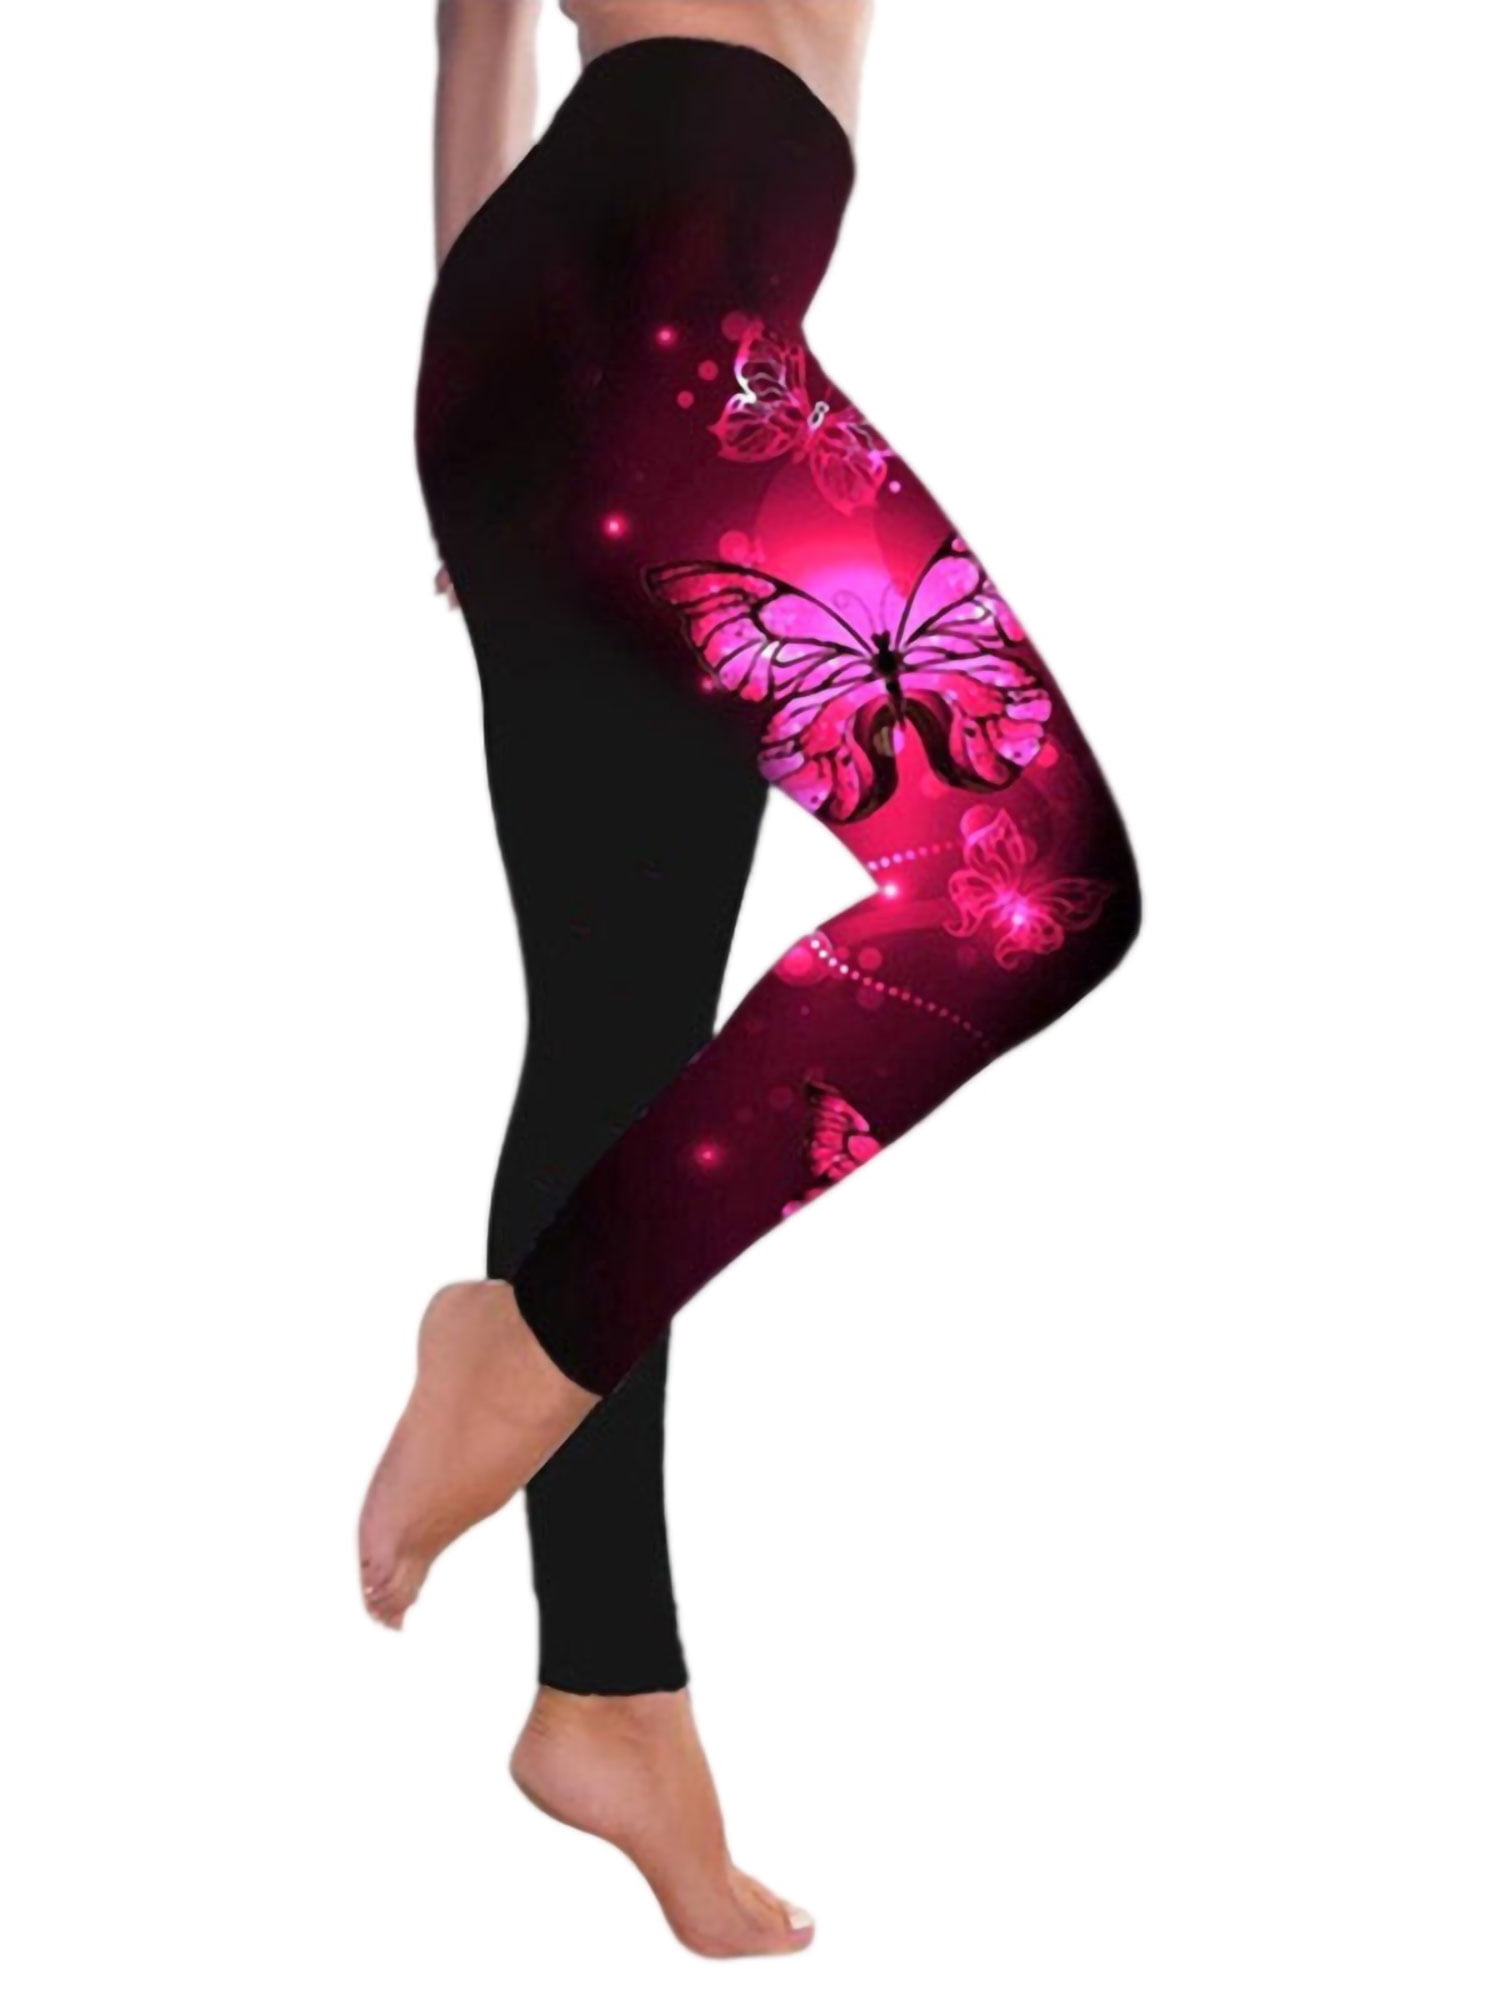 Details about   Women Printed Sports Fitness Legging Shorts Gym Running Skinny Yoga Shorts Pants 